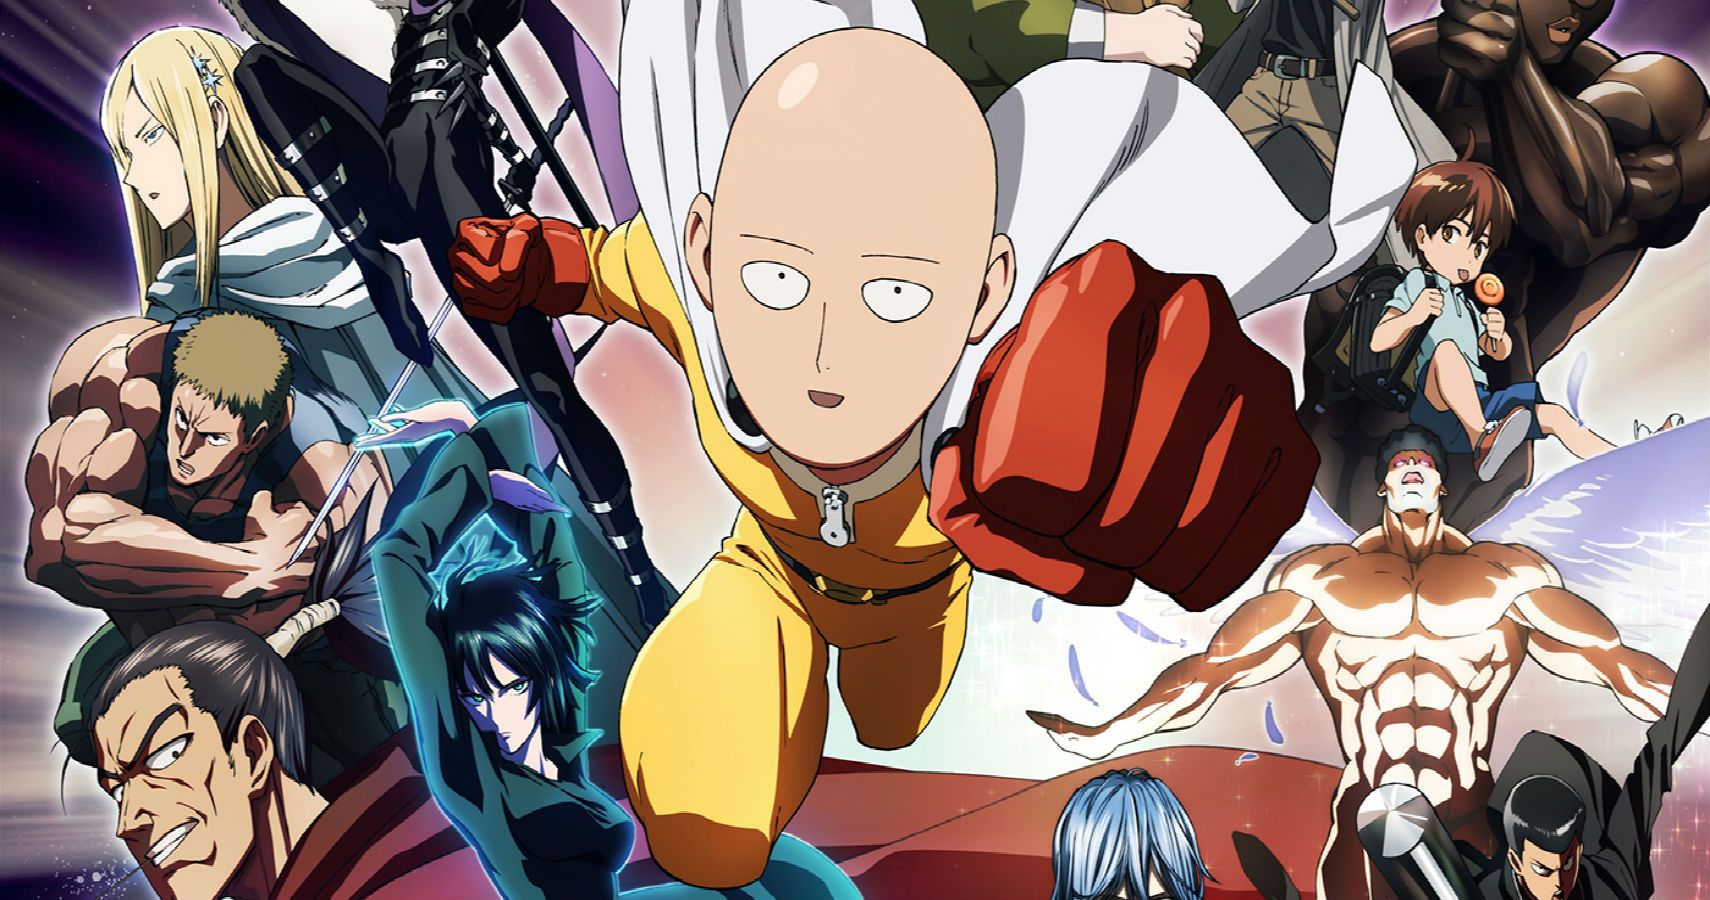 What is Saitama's durability level? Being generous, he punched a